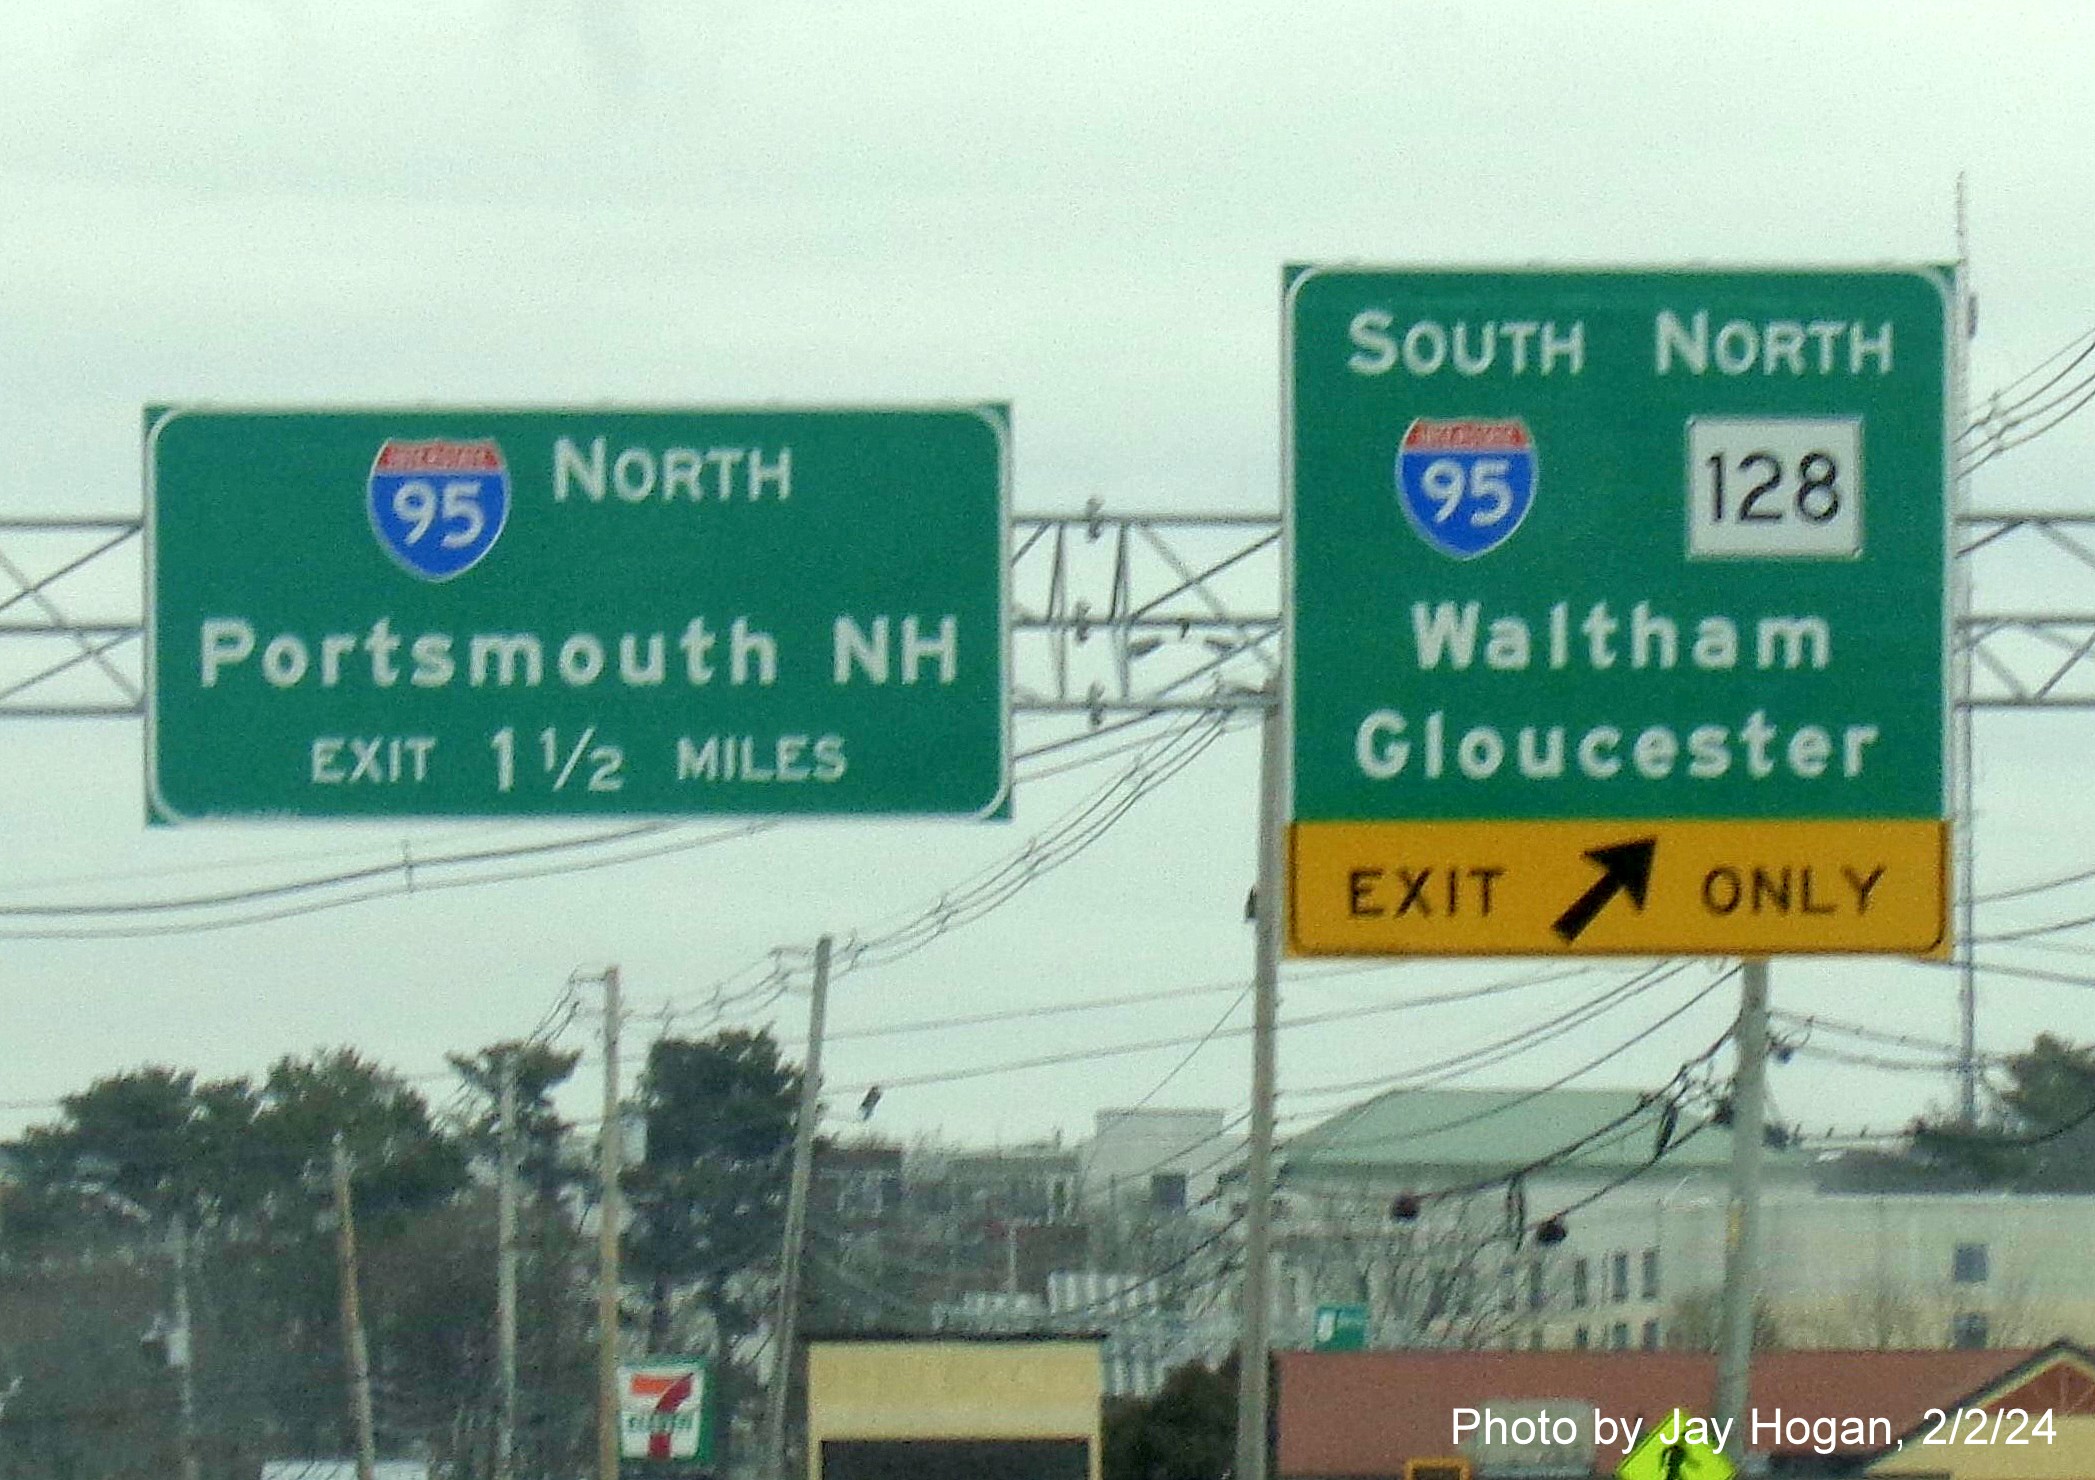 Image of recently placed overhead advance signage for the I-95 and MA 128 exits on US 1 North in Lynnfield, by Kevin Manfra, February 2024